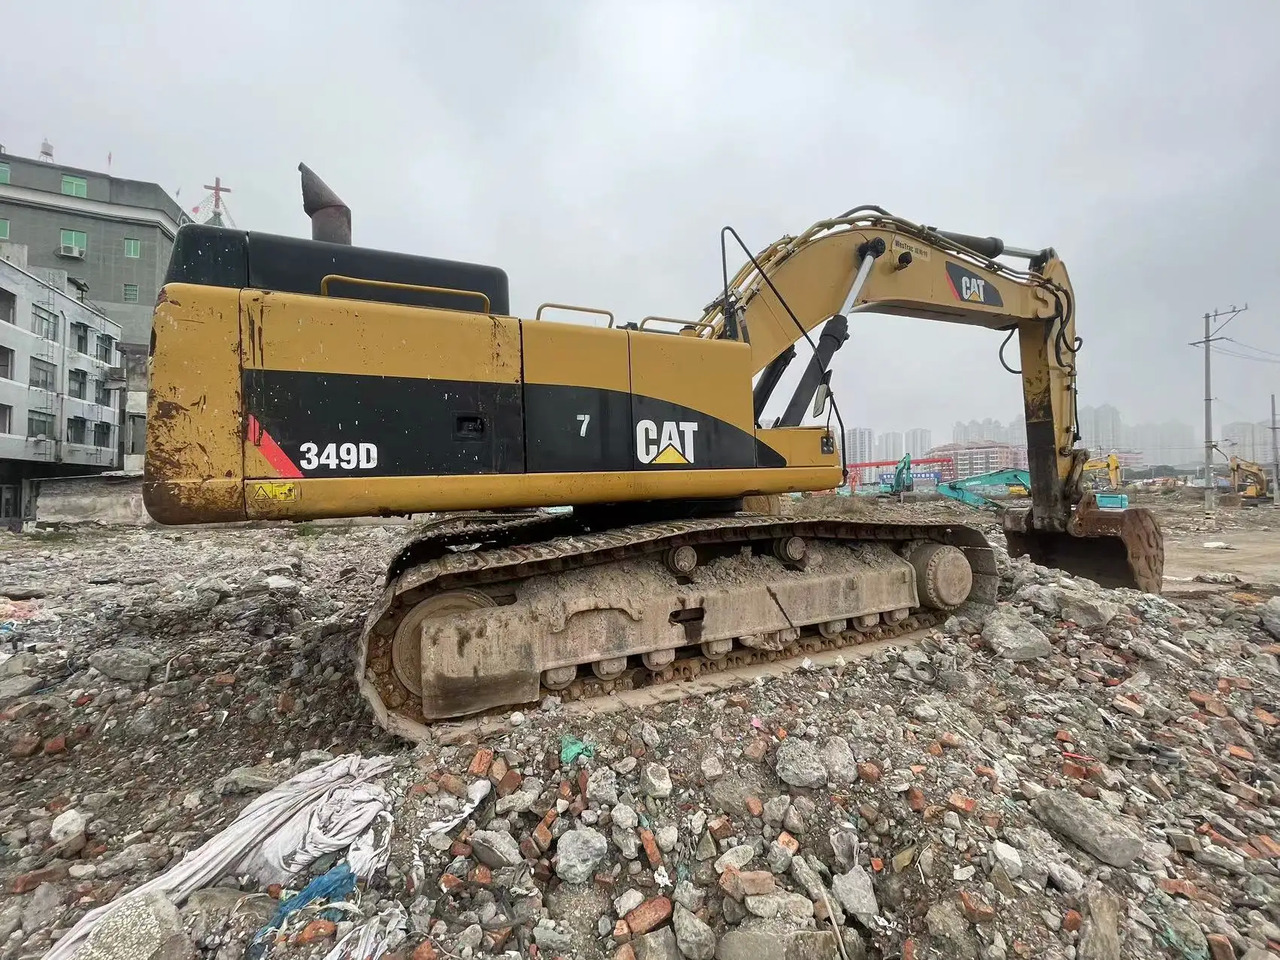 Heavy Duty Caterpillar Digging Machinery Excellent Working Condition Used Cat 349d Excavator In Shanghai lizingą Heavy Duty Caterpillar Digging Machinery Excellent Working Condition Used Cat 349d Excavator In Shanghai: foto 3